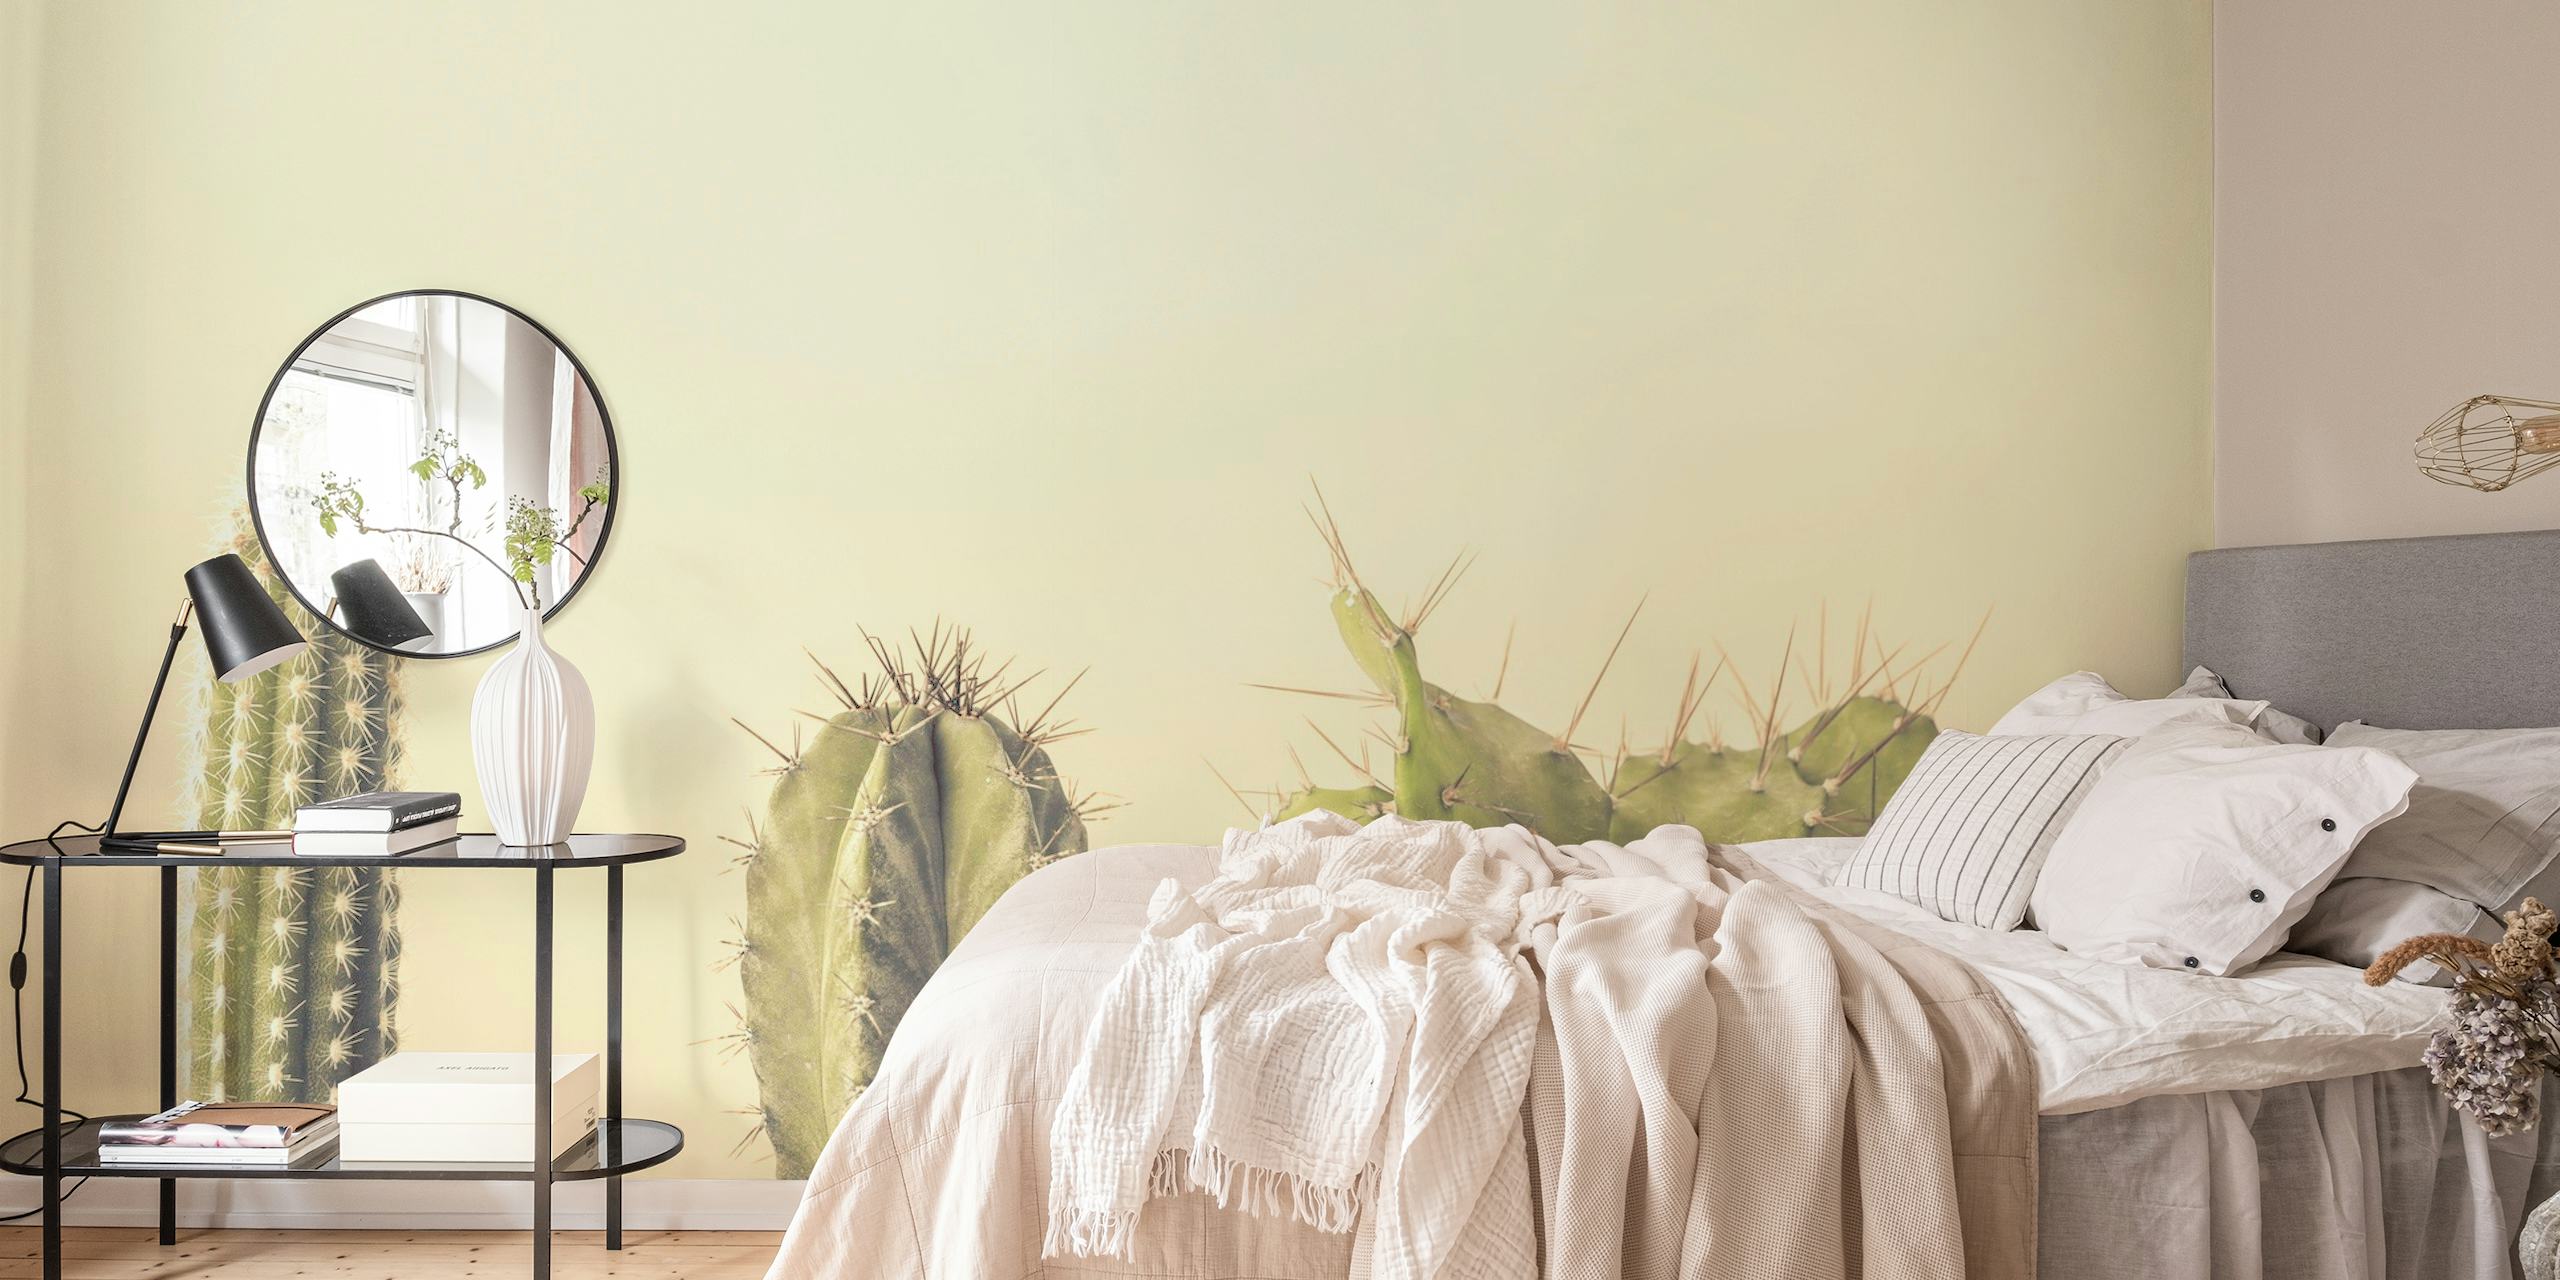 Three cacti against a neutral background wall mural